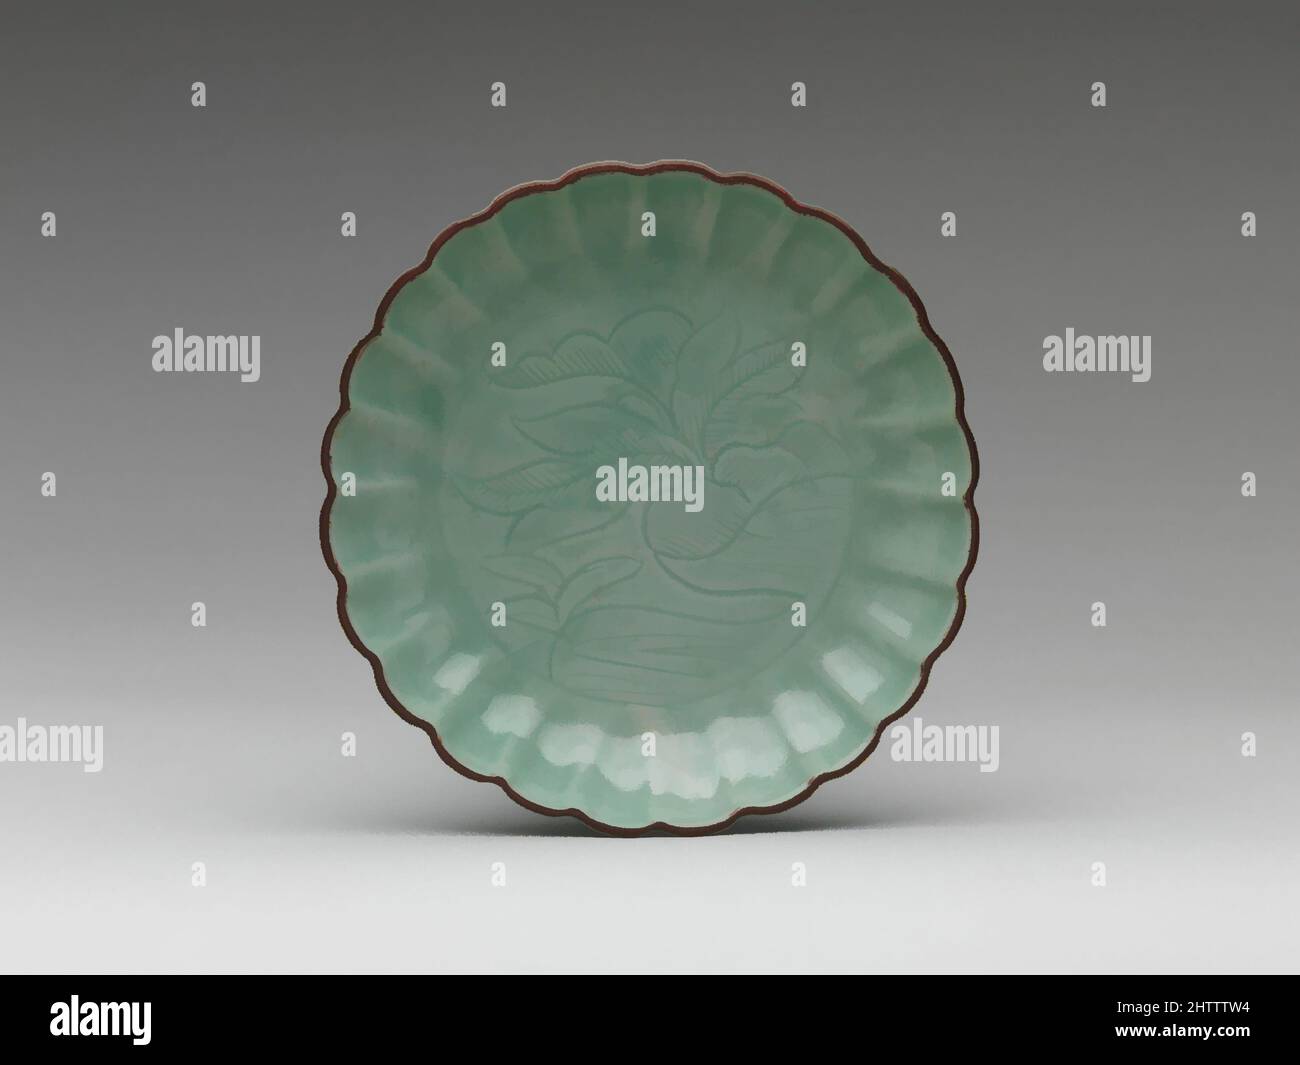 Art inspired by Dish with Vegetal Design, Edo period (1615–1868), mid-17th century, Japan, Porcelain with incised decoration under celadon glaze (Hizen ware; Imari type), H. 2 1/2 in. (6.4 cm); Diam. 8 7/8 in. (22.5 cm), Ceramics, Classic works modernized by Artotop with a splash of modernity. Shapes, color and value, eye-catching visual impact on art. Emotions through freedom of artworks in a contemporary way. A timeless message pursuing a wildly creative new direction. Artists turning to the digital medium and creating the Artotop NFT Stock Photo